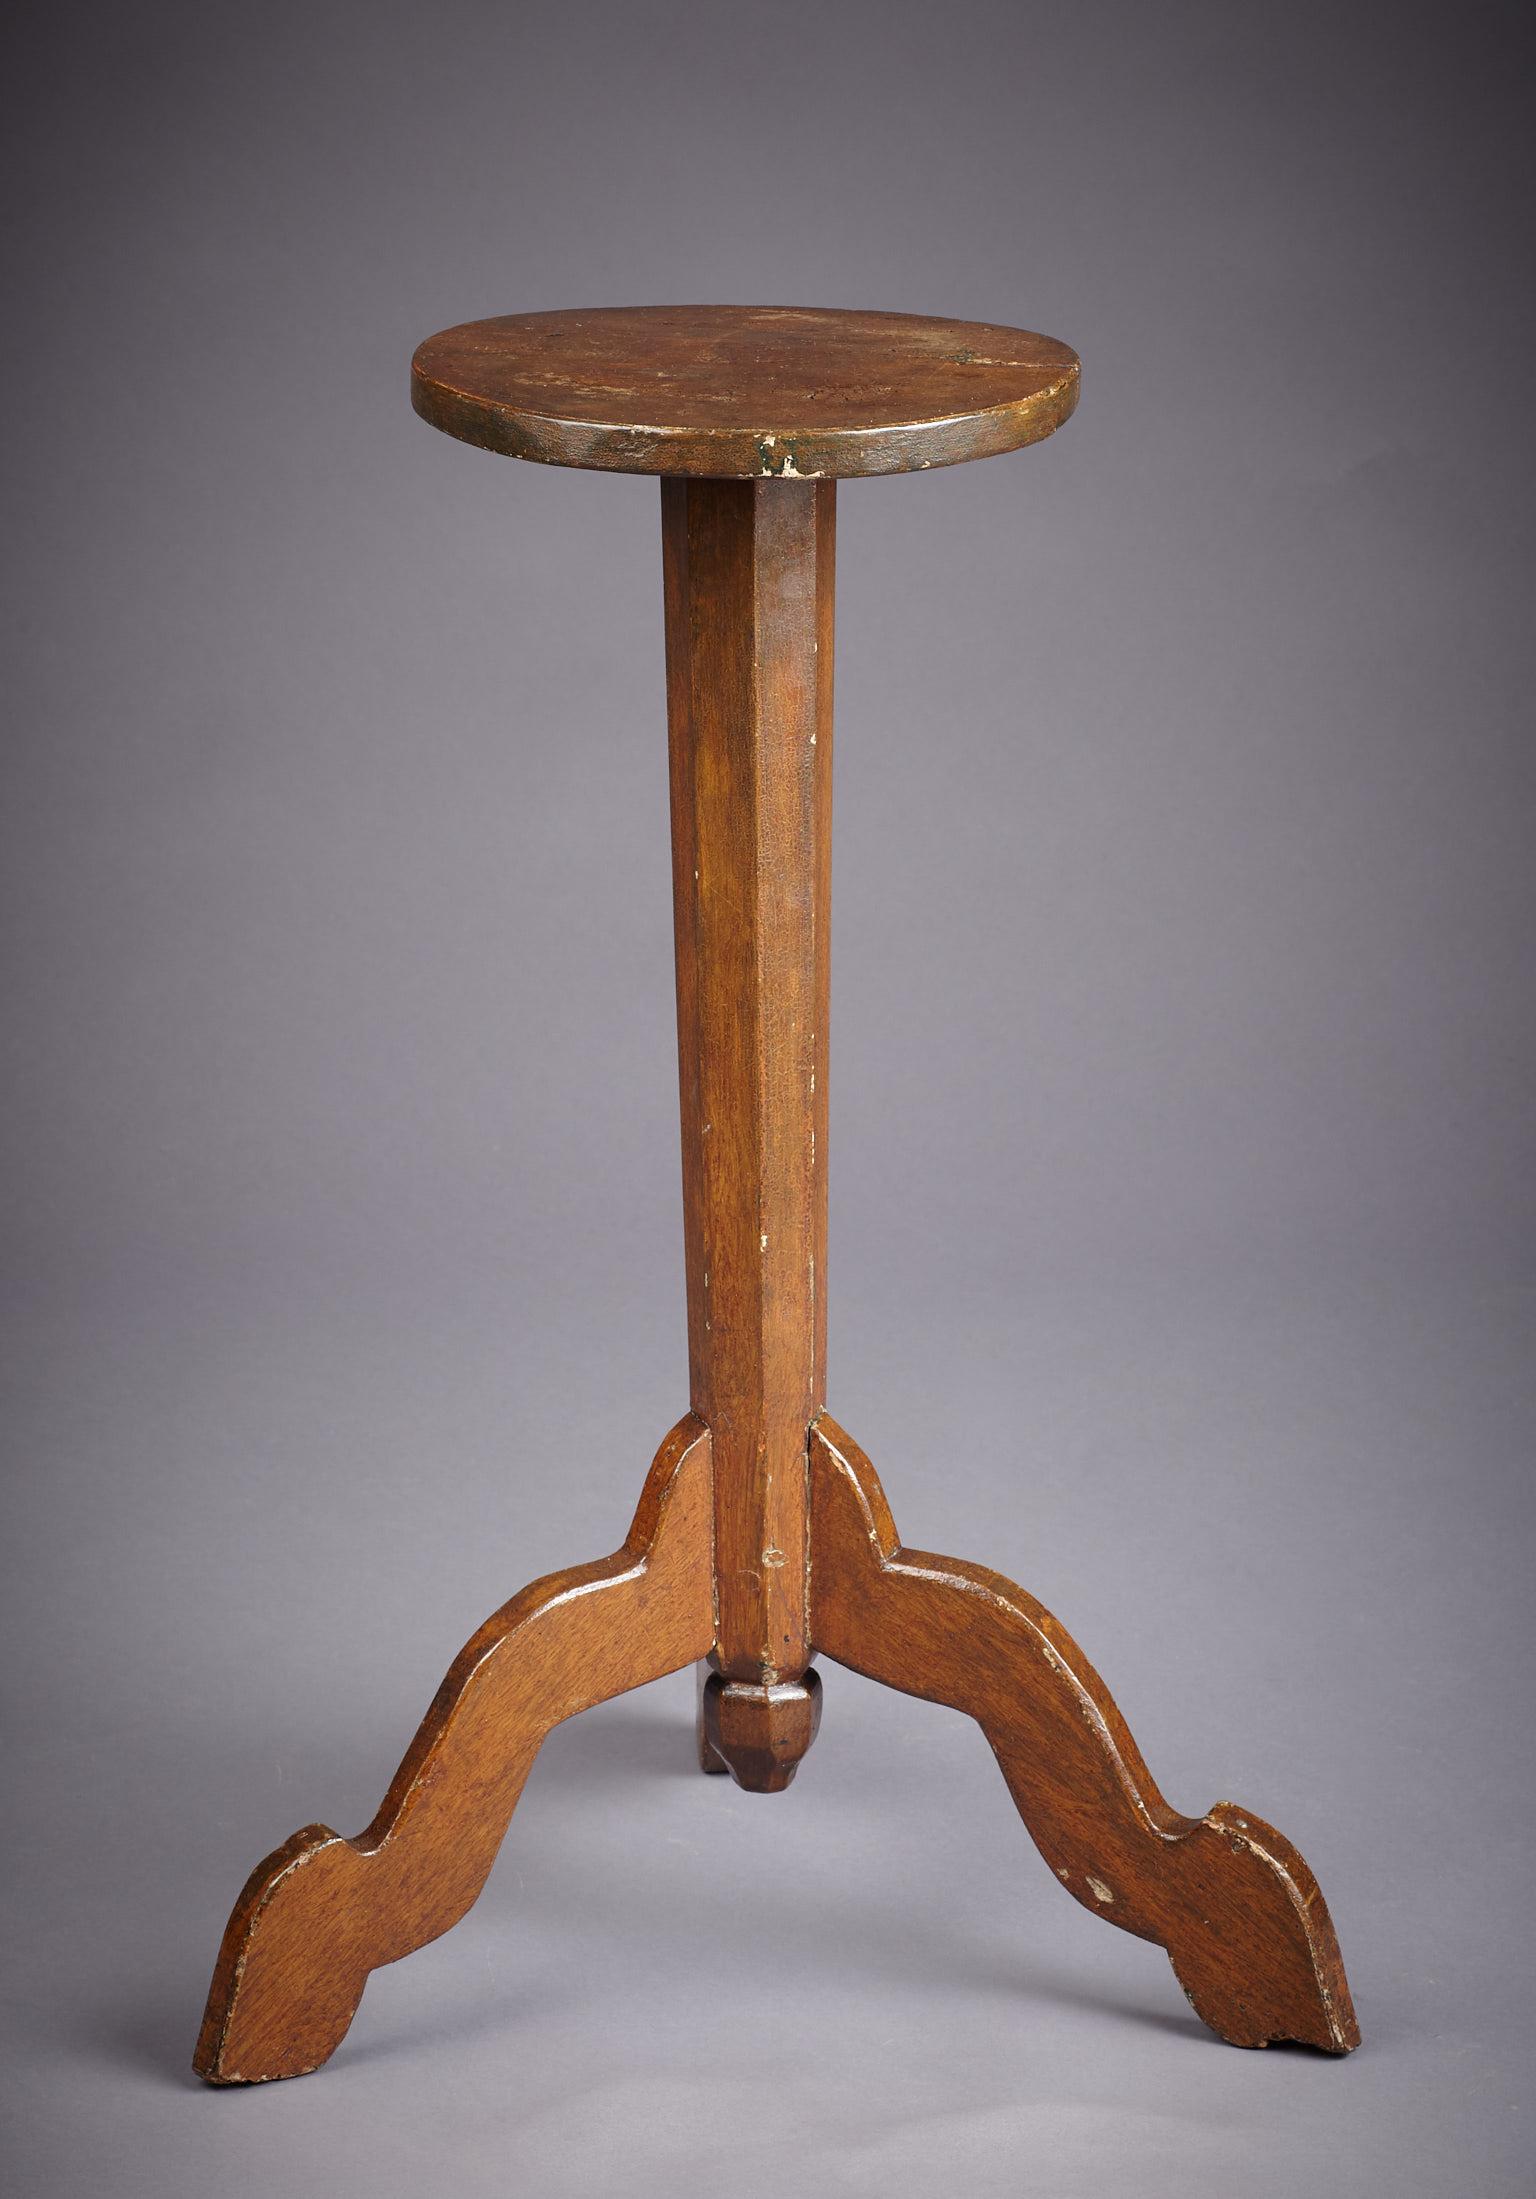 Painted Oak Candle-Stand, Early 18th Century, Queen Anne, England, circa 1710 im Angebot 3